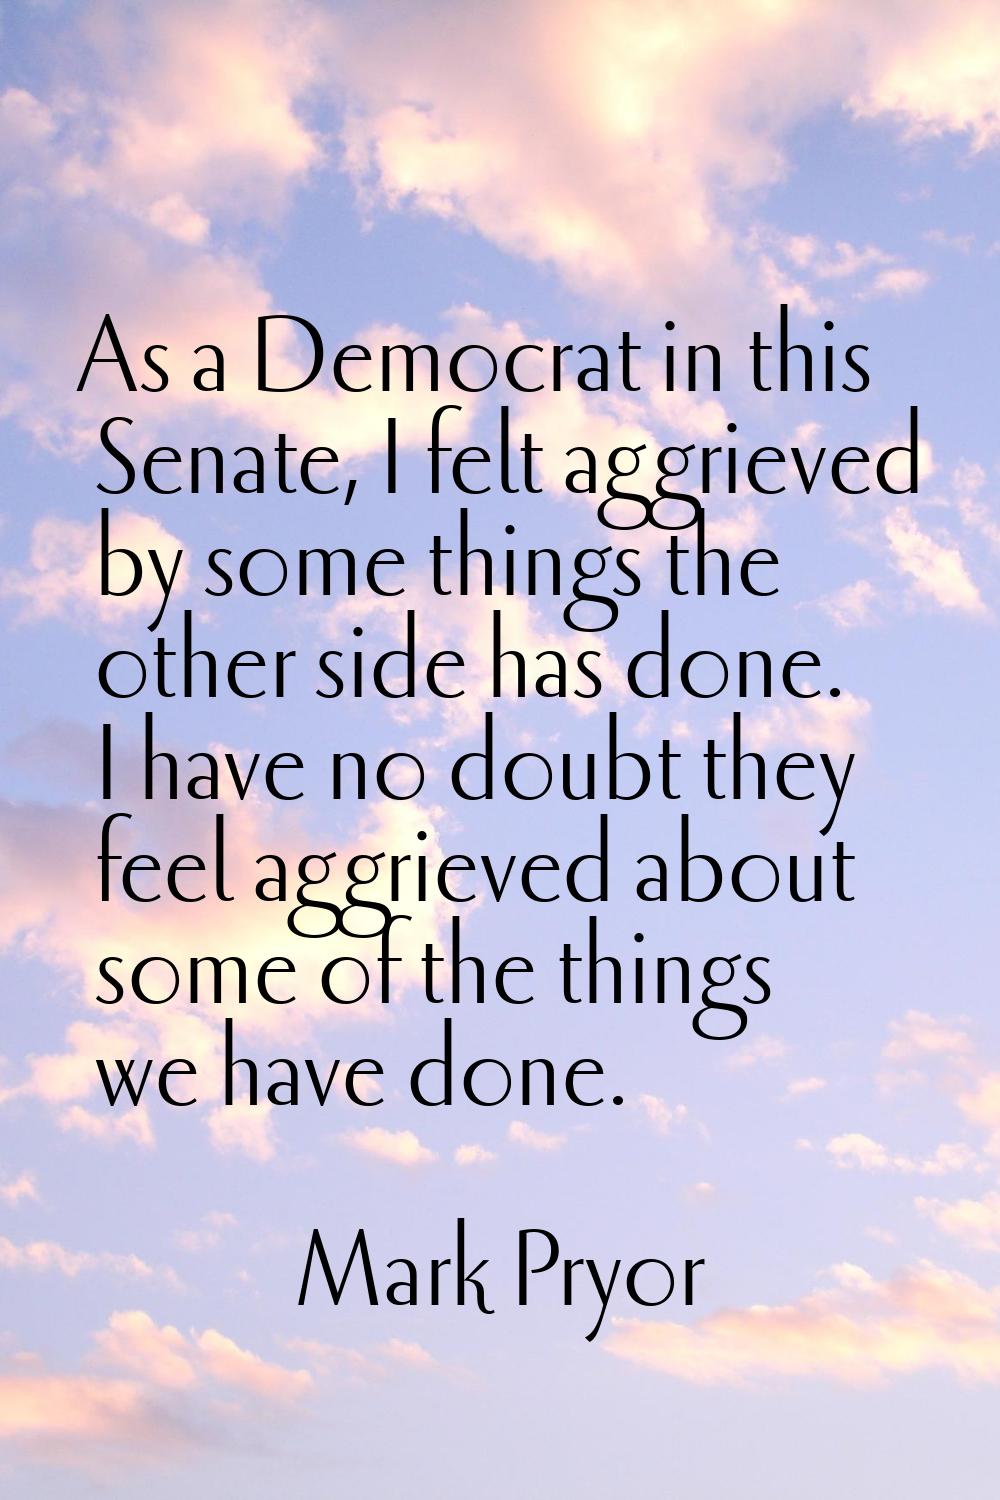 As a Democrat in this Senate, I felt aggrieved by some things the other side has done. I have no do